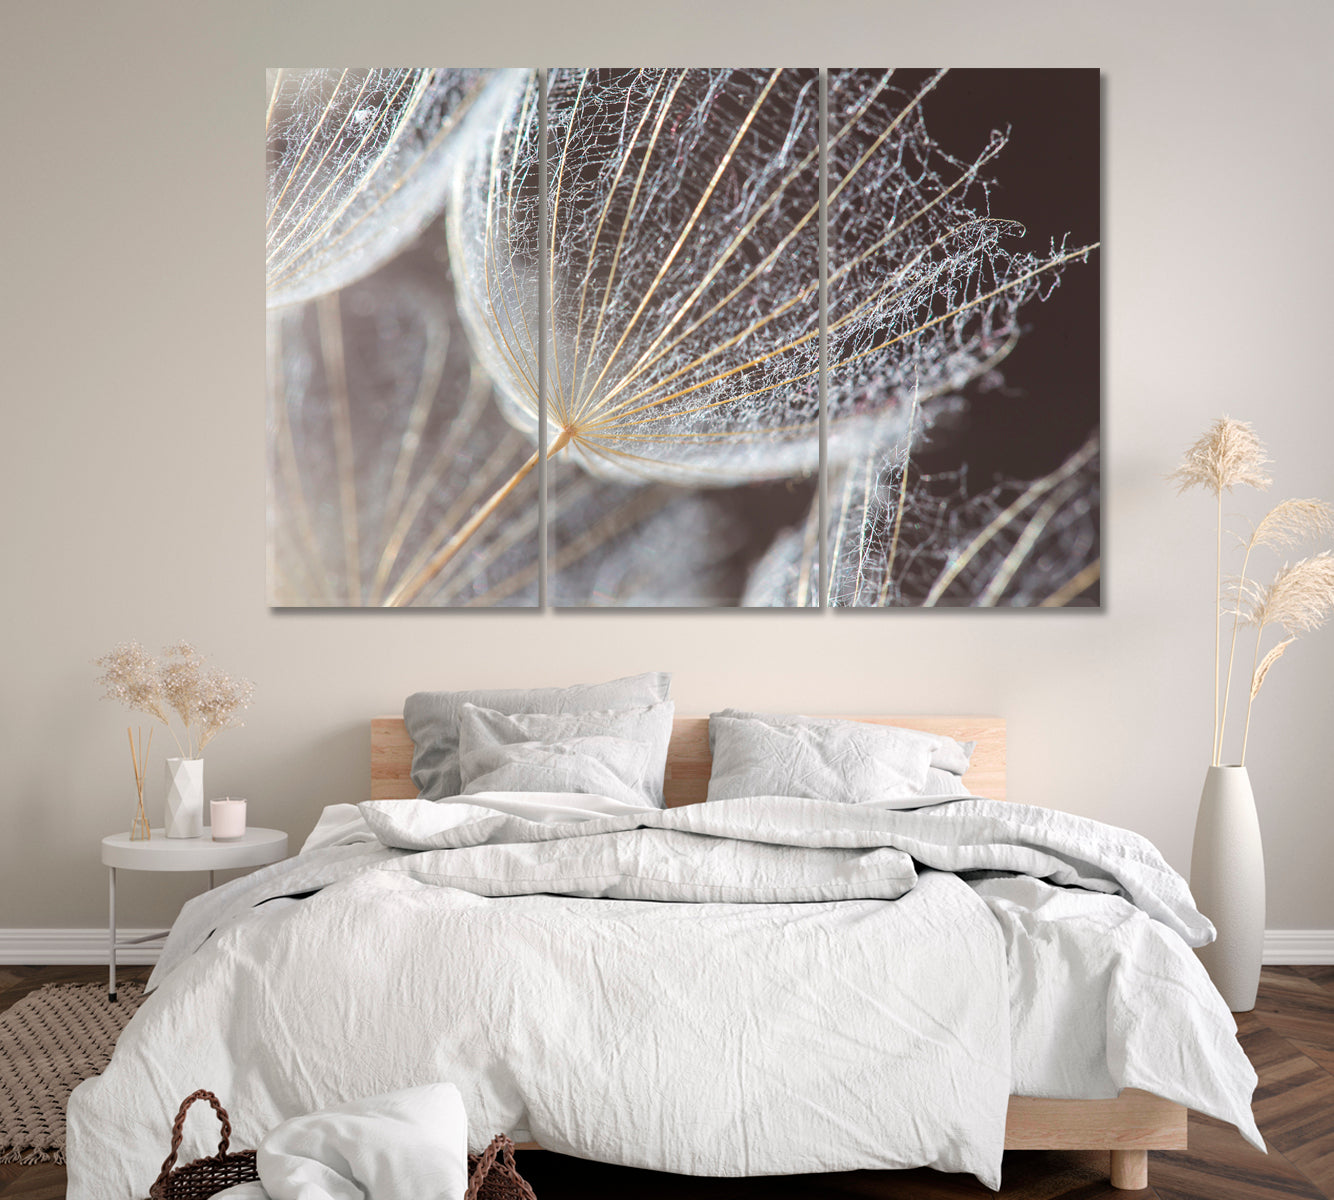 Dandelion Seed Canvas Print ArtLexy 3 Panels 36"x24" inches 